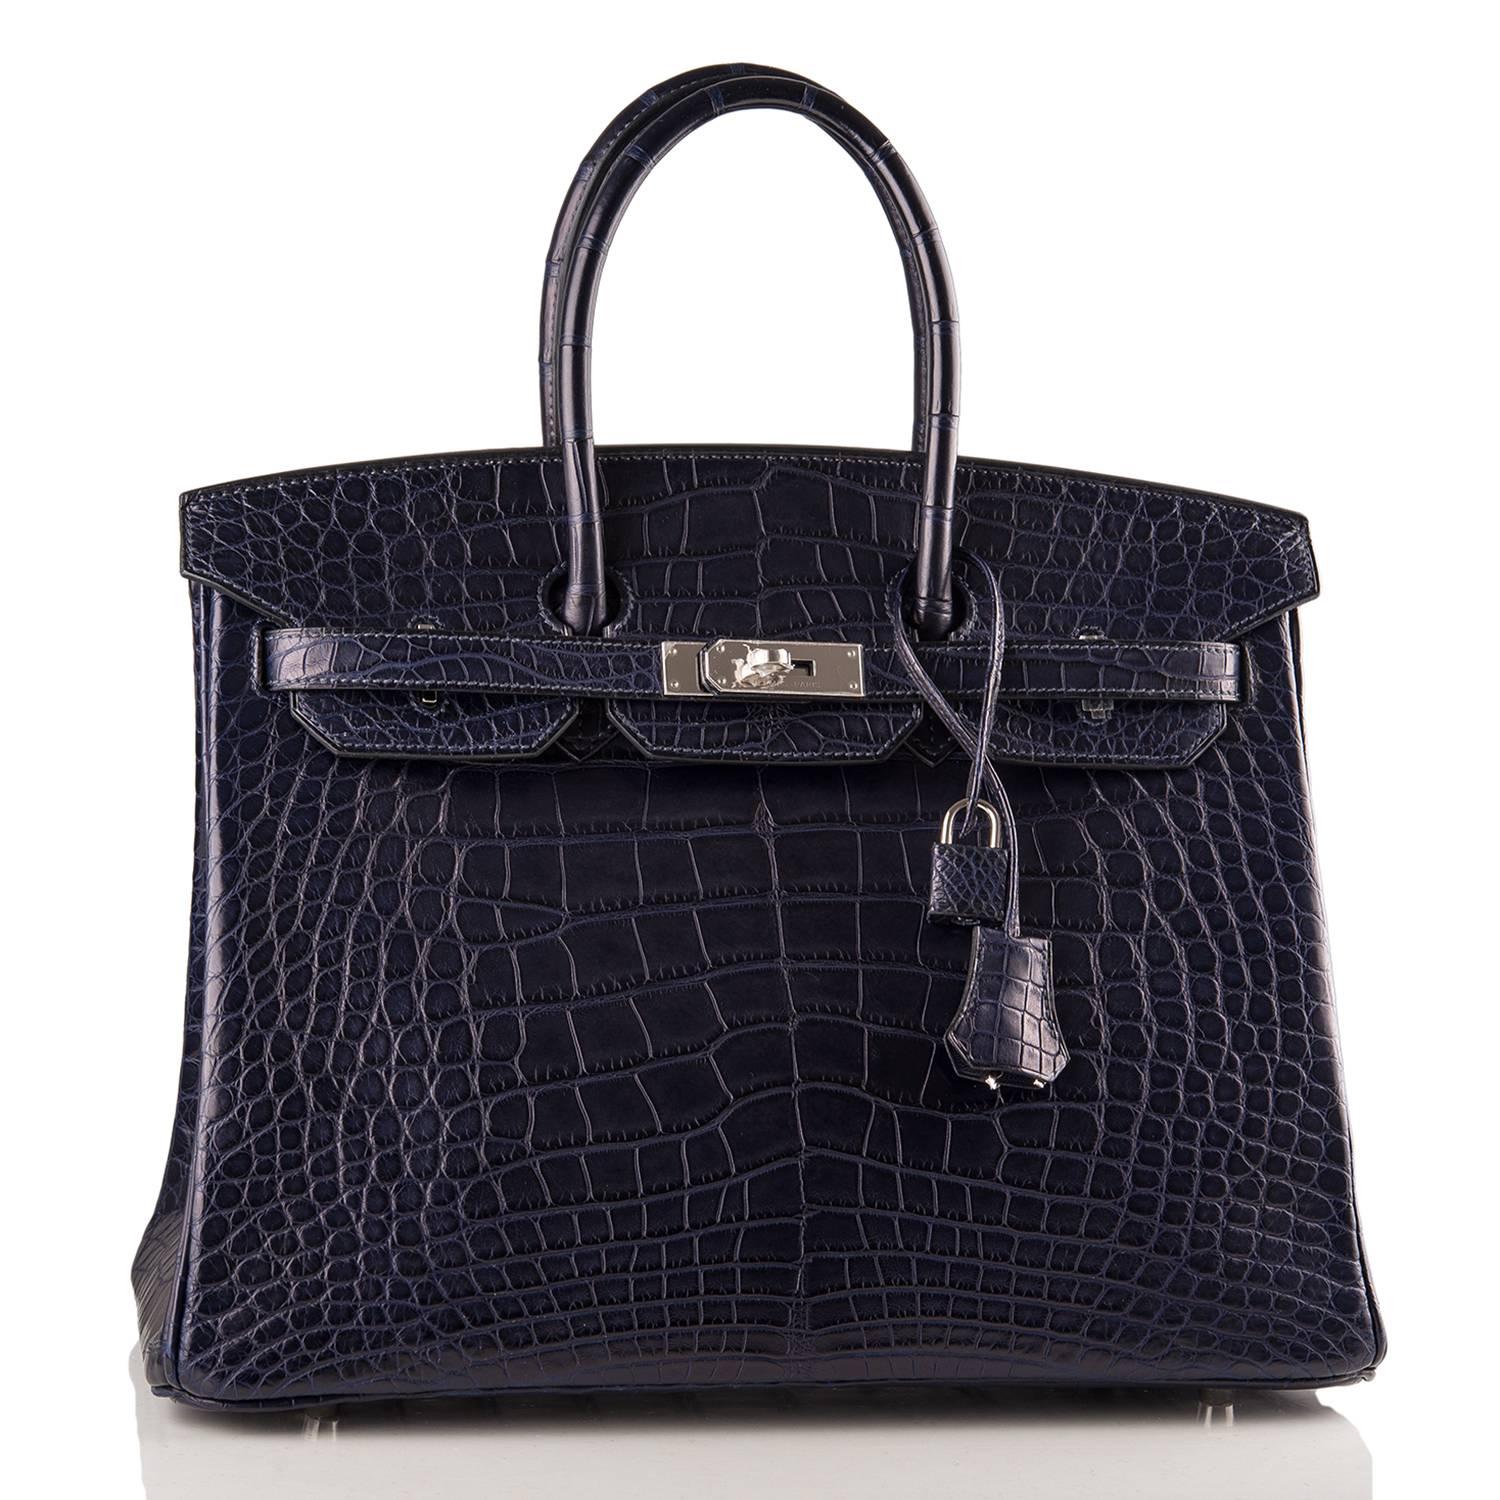 Hermes Blue Marine Birkin 35cm of matte alligator leather with palladium hardware.

This Birkin has tonal stitching, a front toggle closure, a clochette with lock and two keys, and double rolled handles.

The interior is lined with Blue Marine